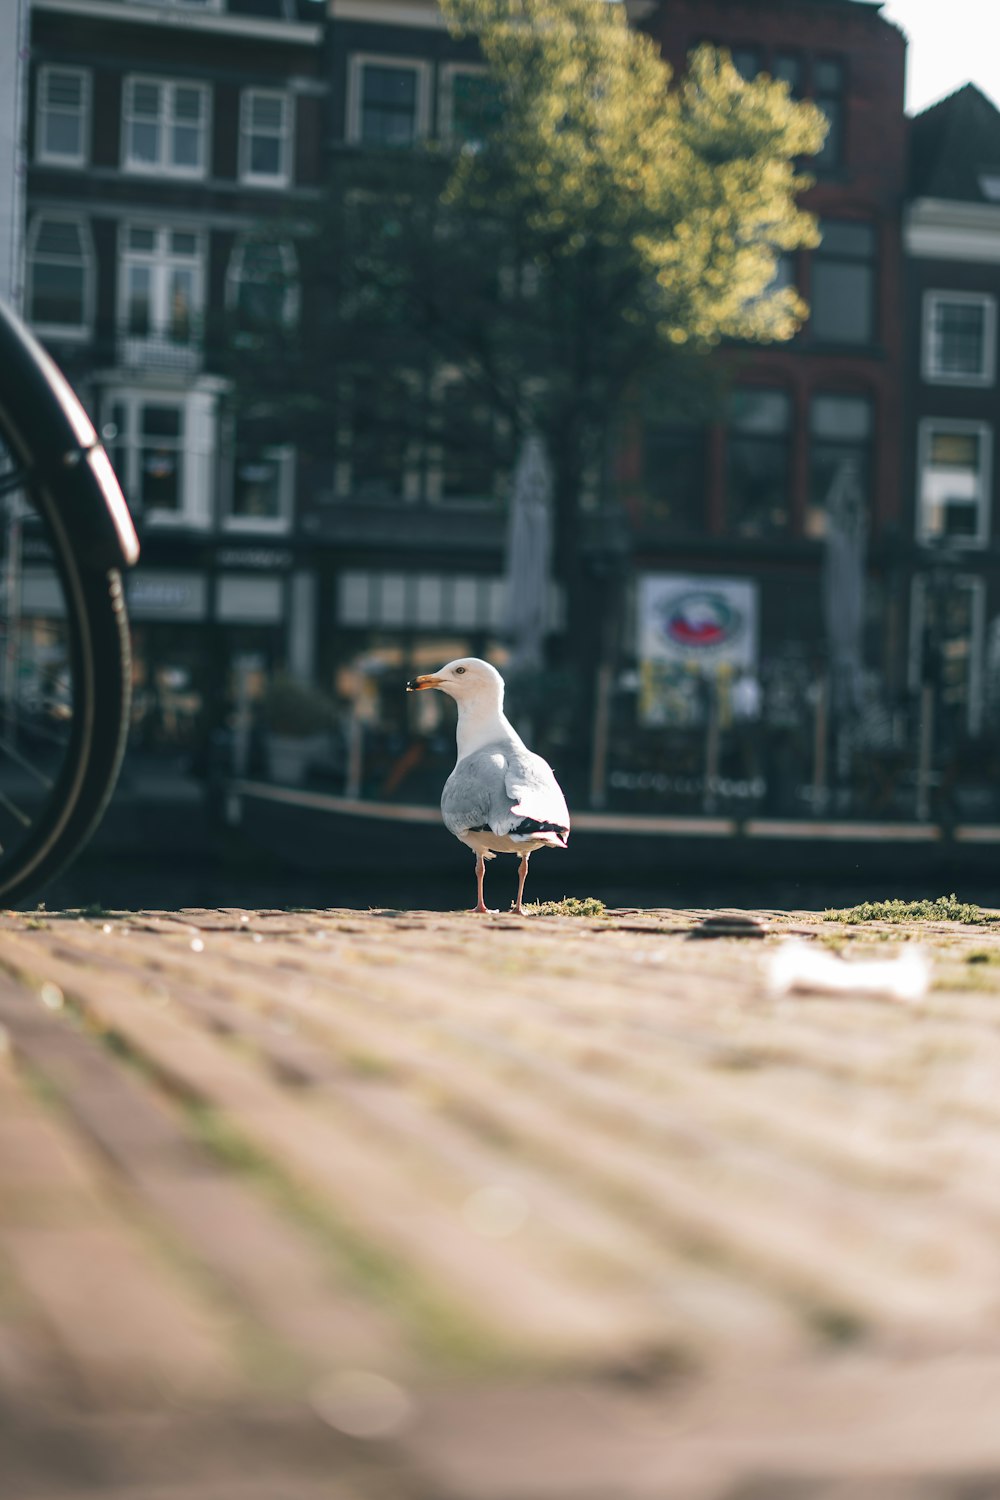 a seagull standing on a brick sidewalk next to a bicycle